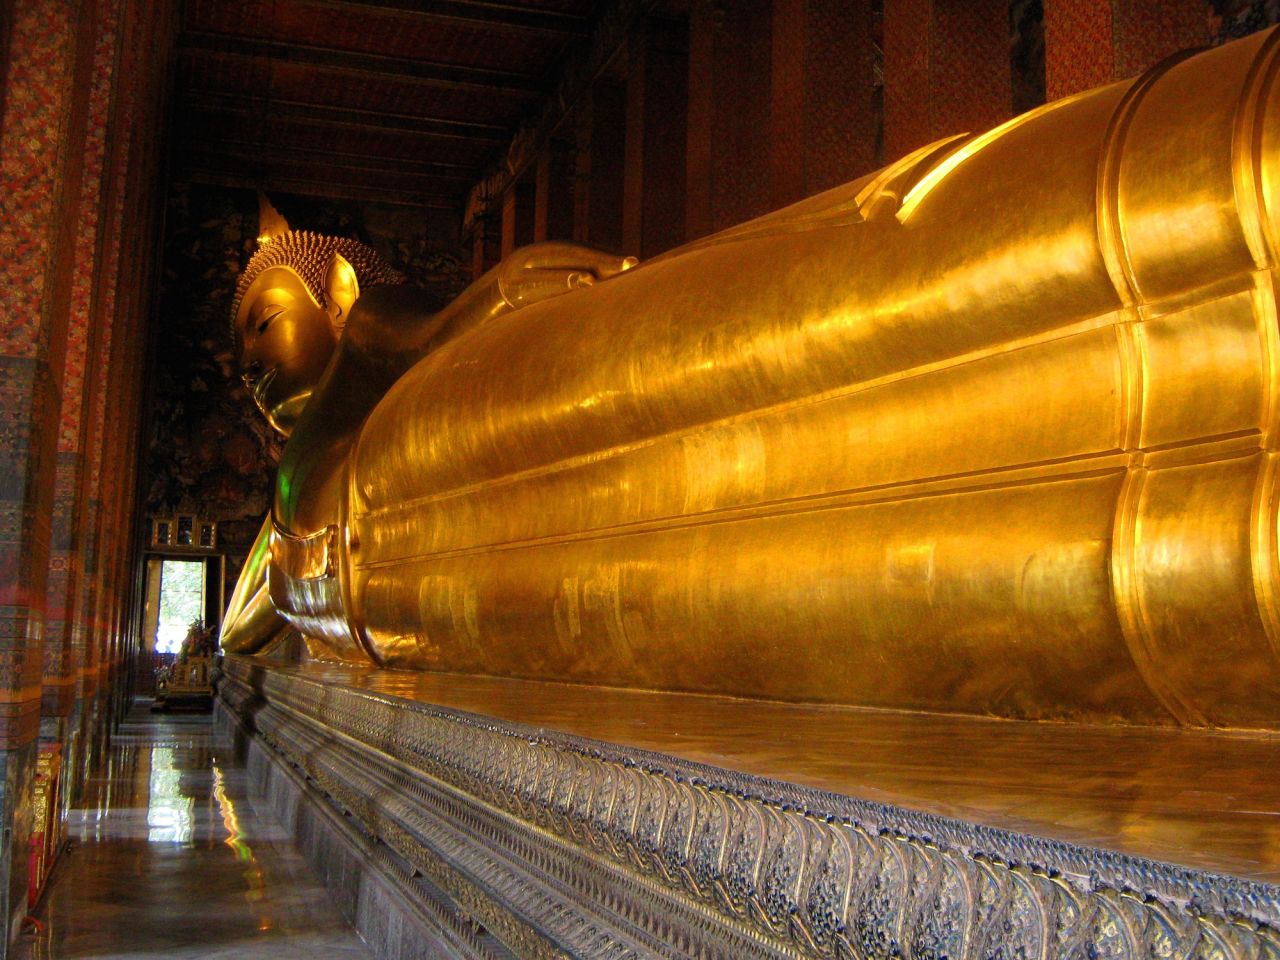 Located in Bangkok Wat Pho temple complex, this reclining Buddha measures 15 meters high and 43 meters long. 